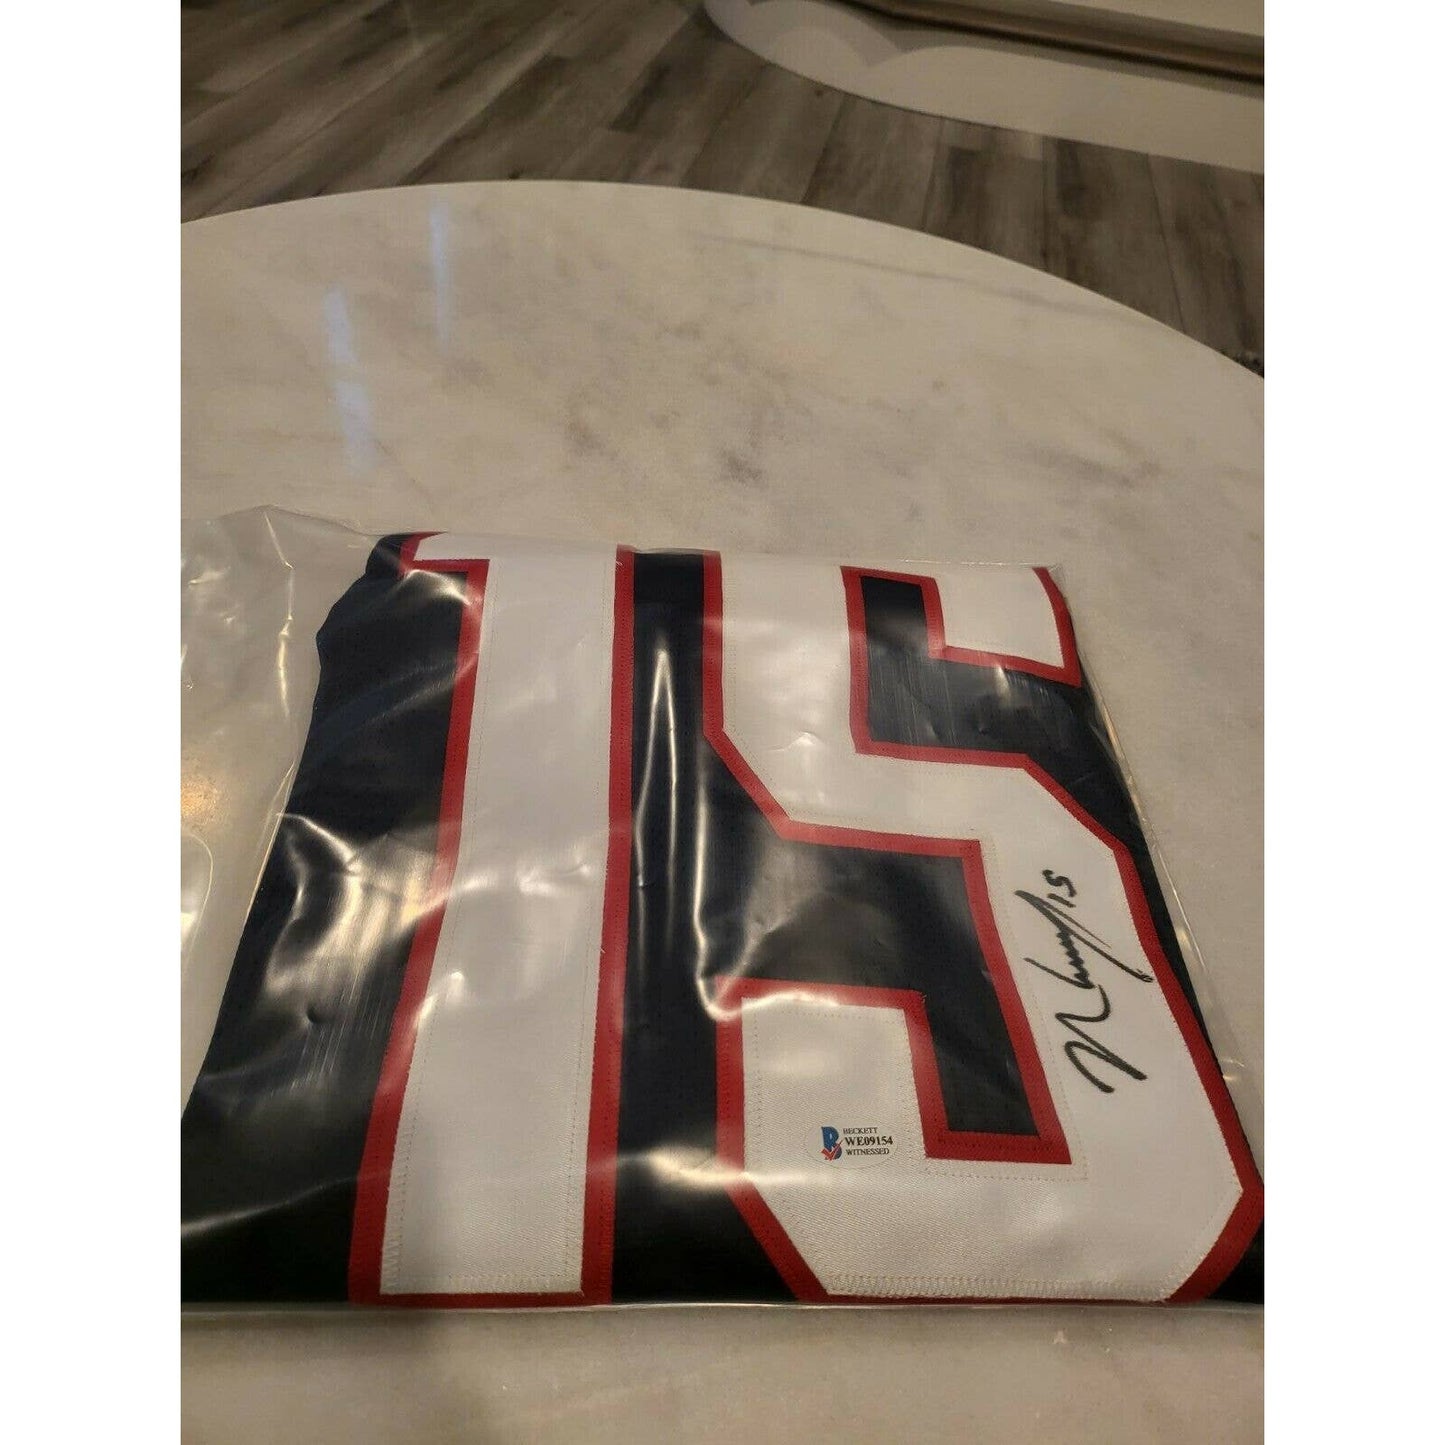 N'Keal Harry Autographed/Signed Jersey Beckett Sticker New England Patriots - TreasuresEvolved